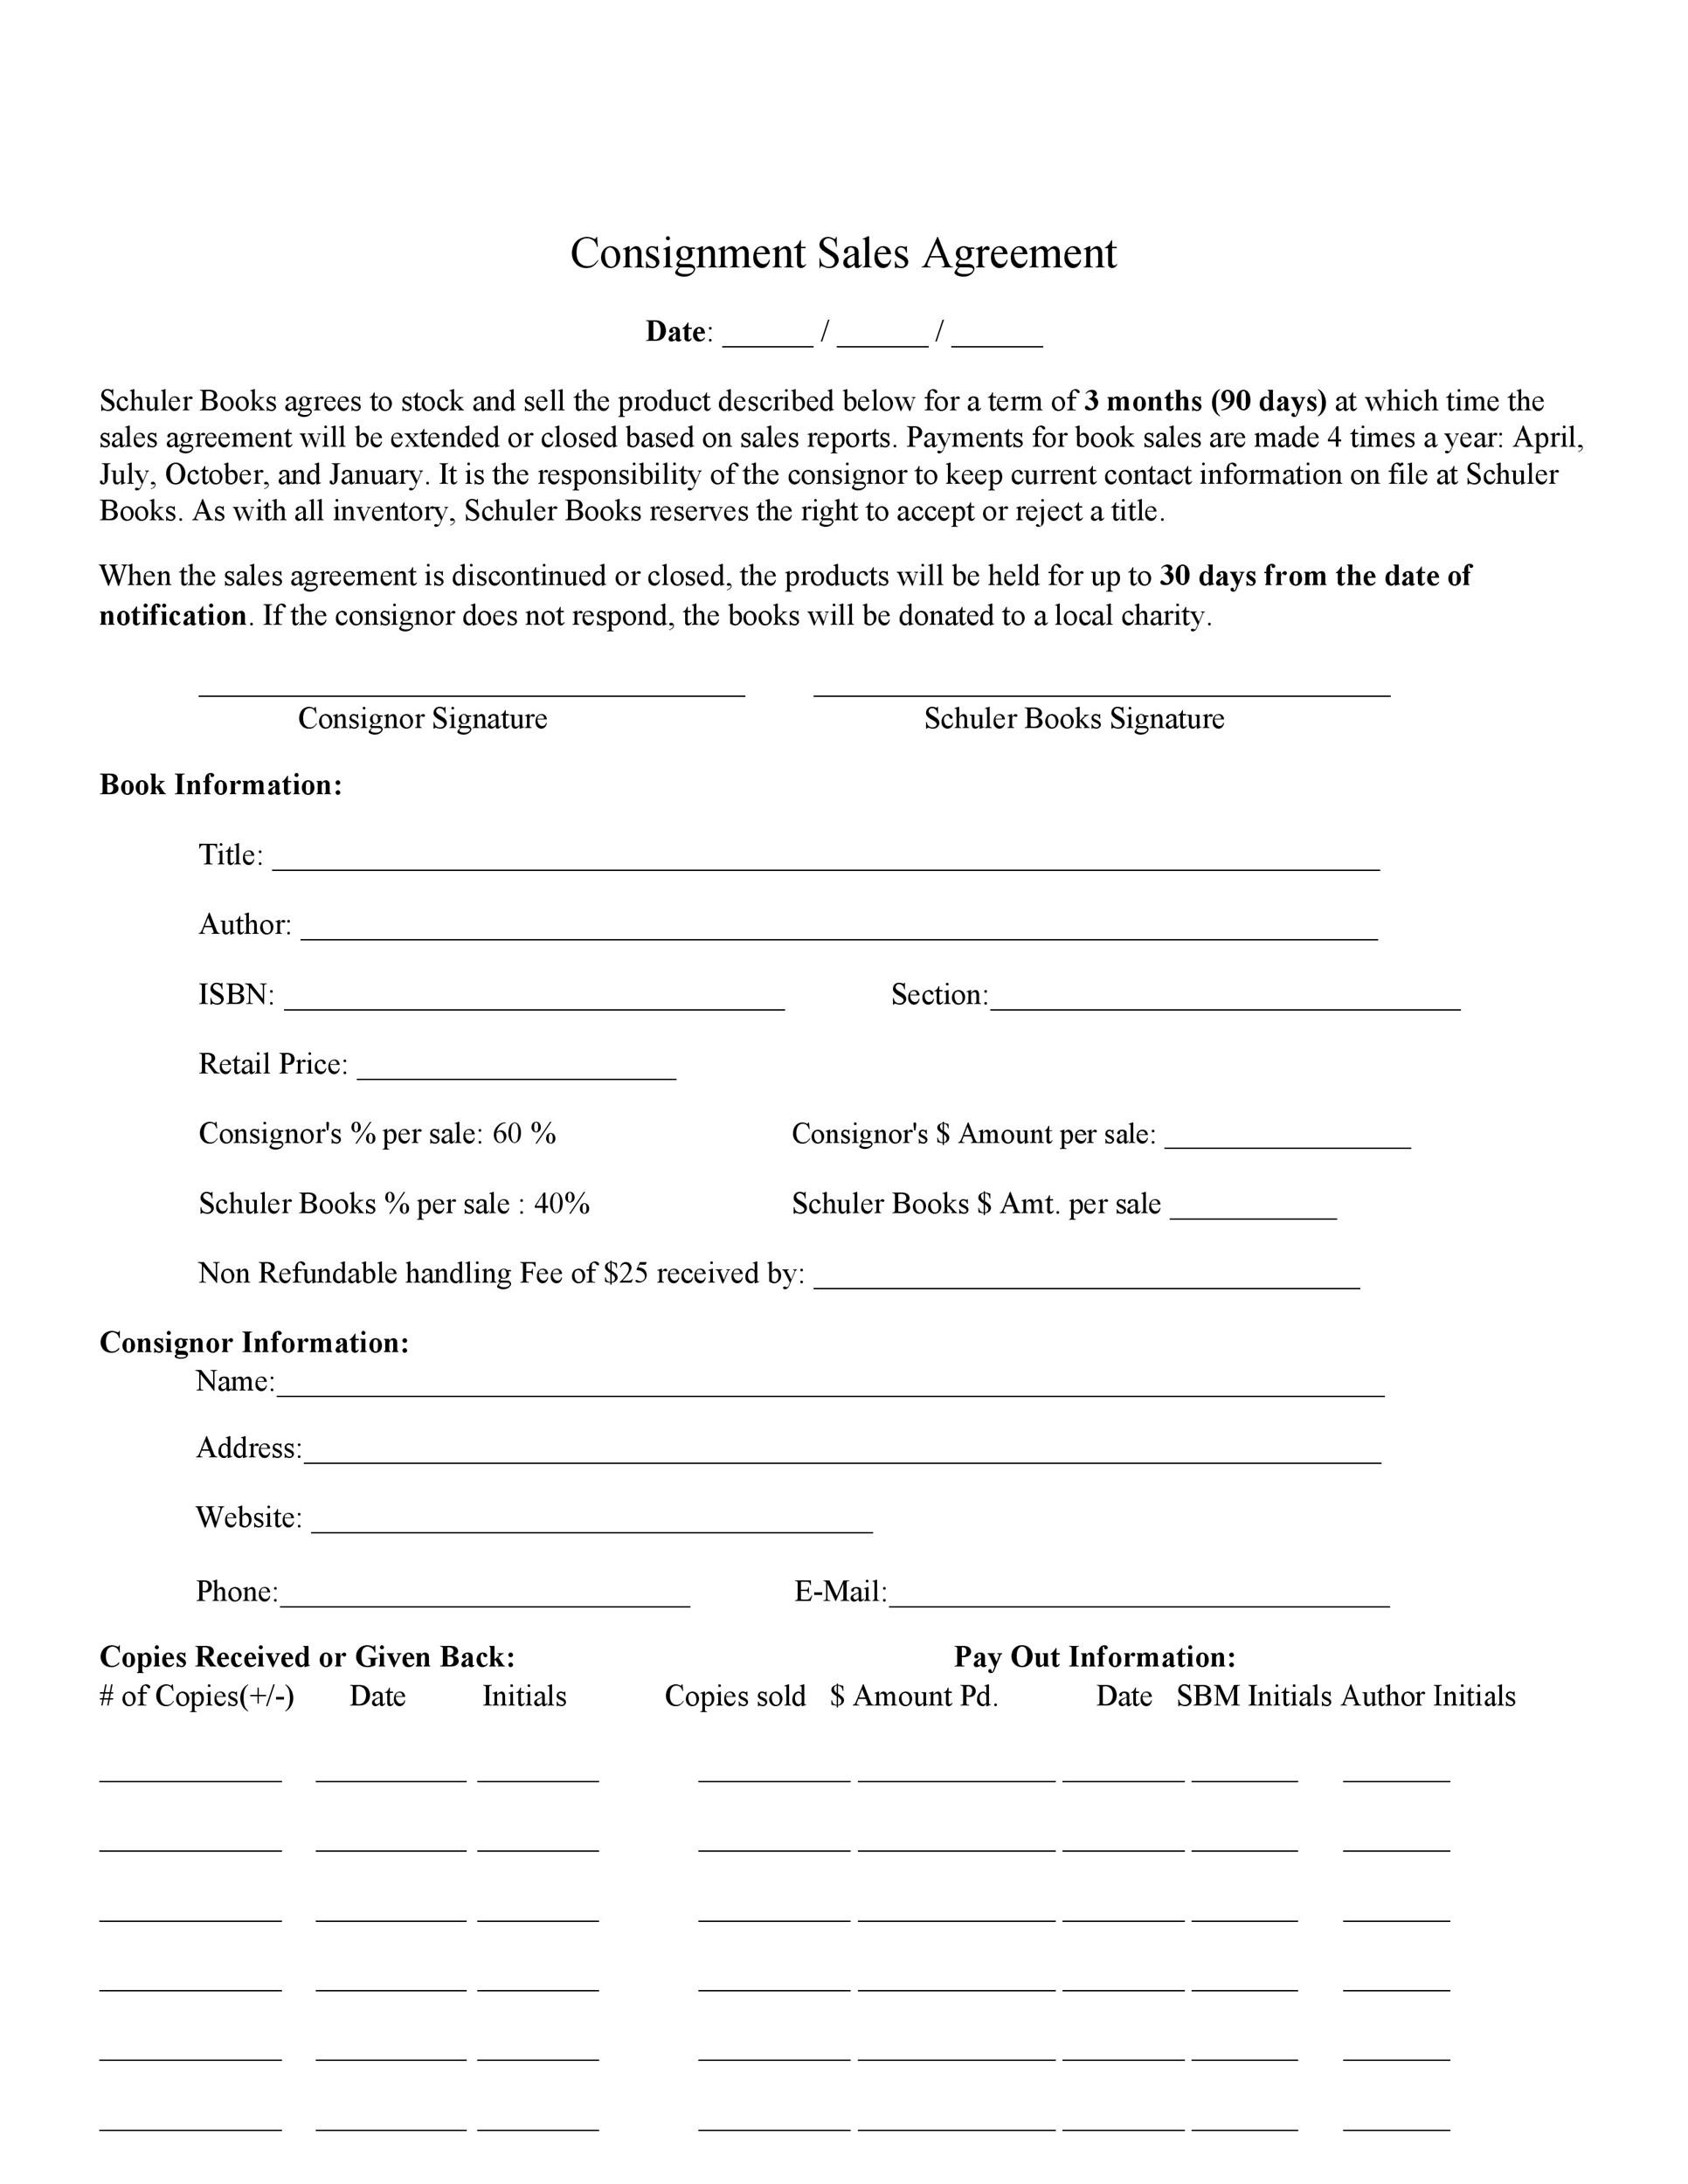 40 Best Consignment Agreement Templates Forms TemplateLab